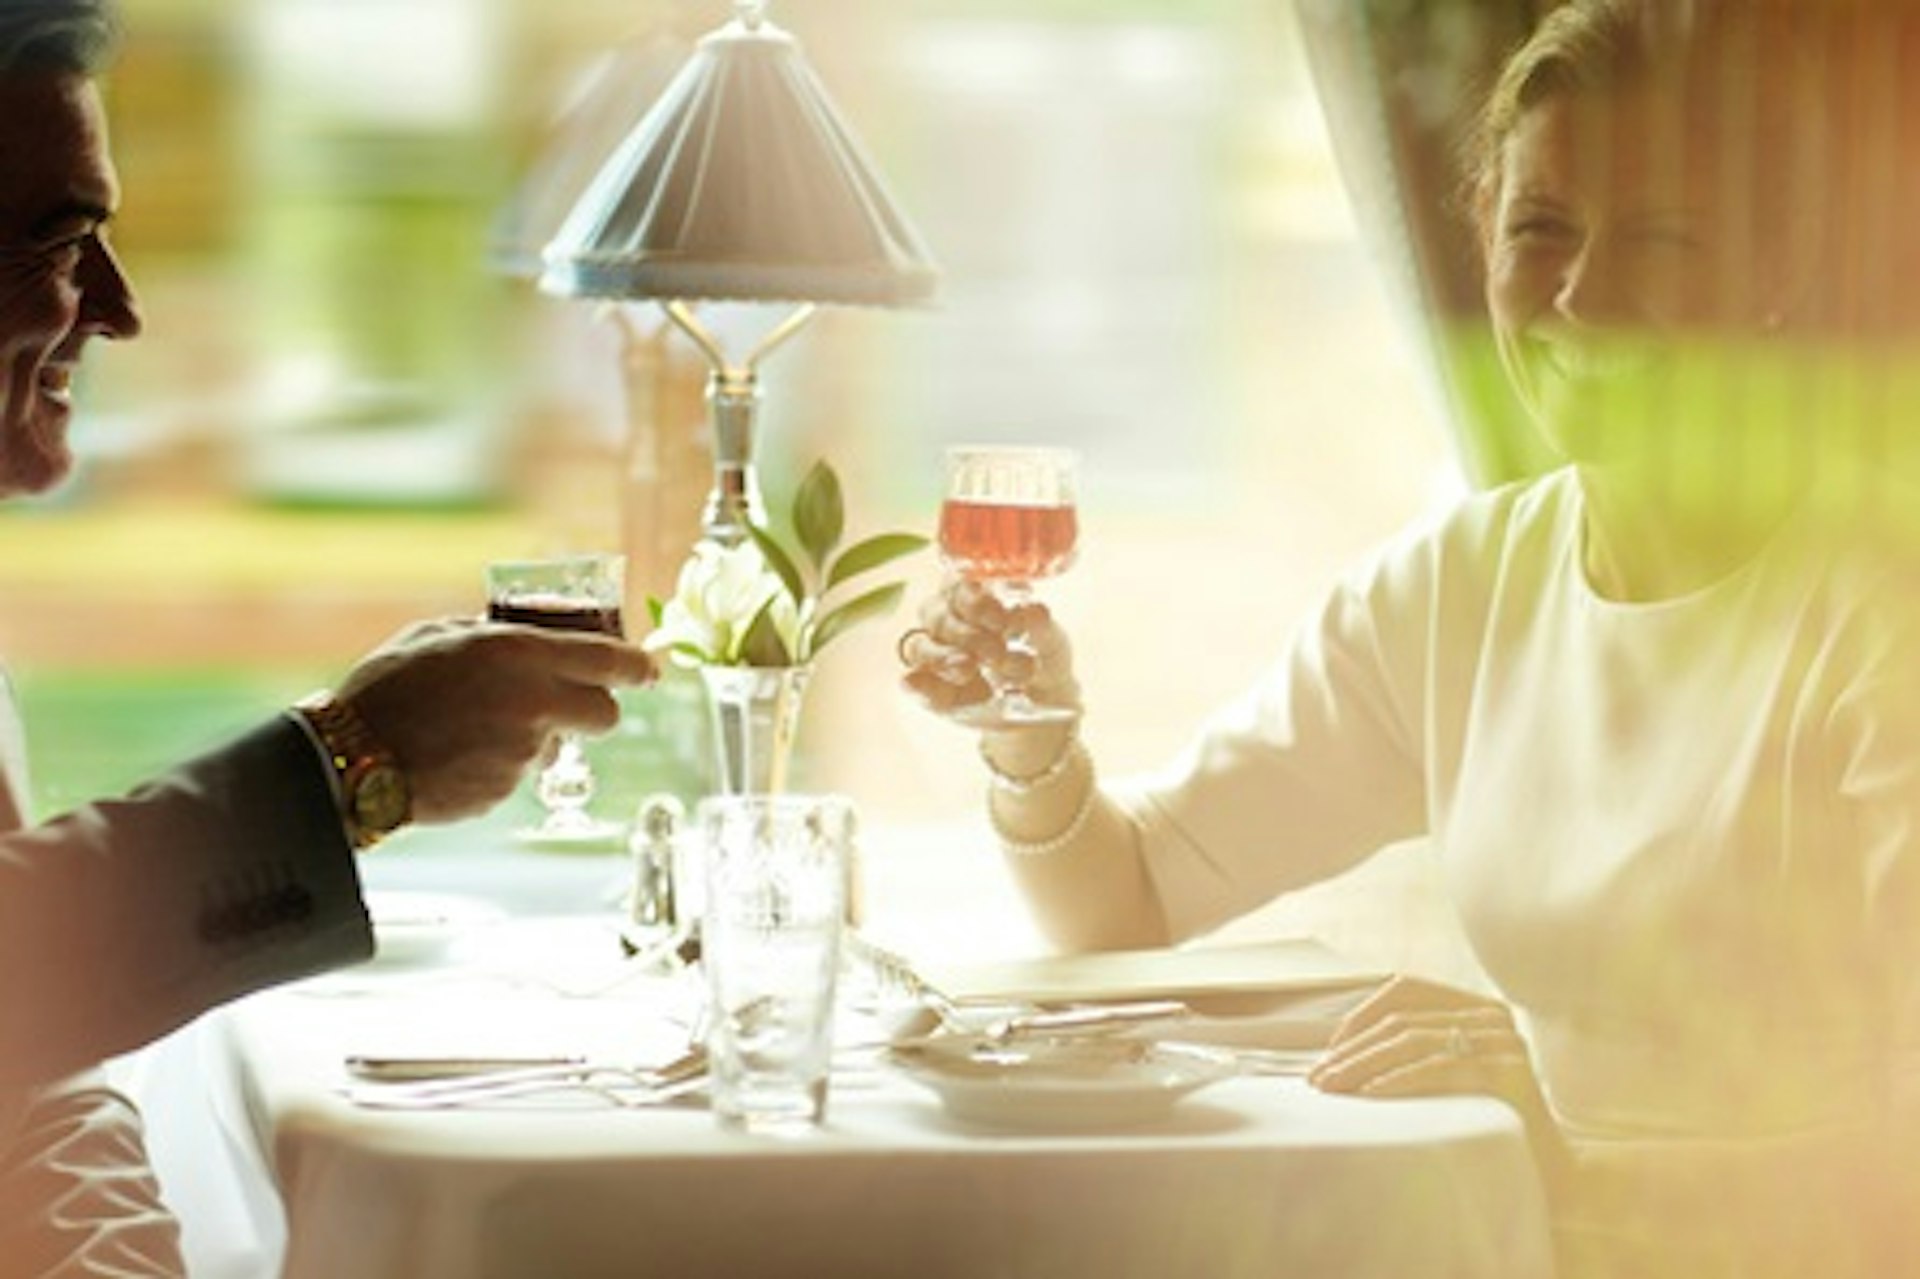 Best of British Full Day trip Excursion for Two on the Belmond British Pullman Luxury Train 4